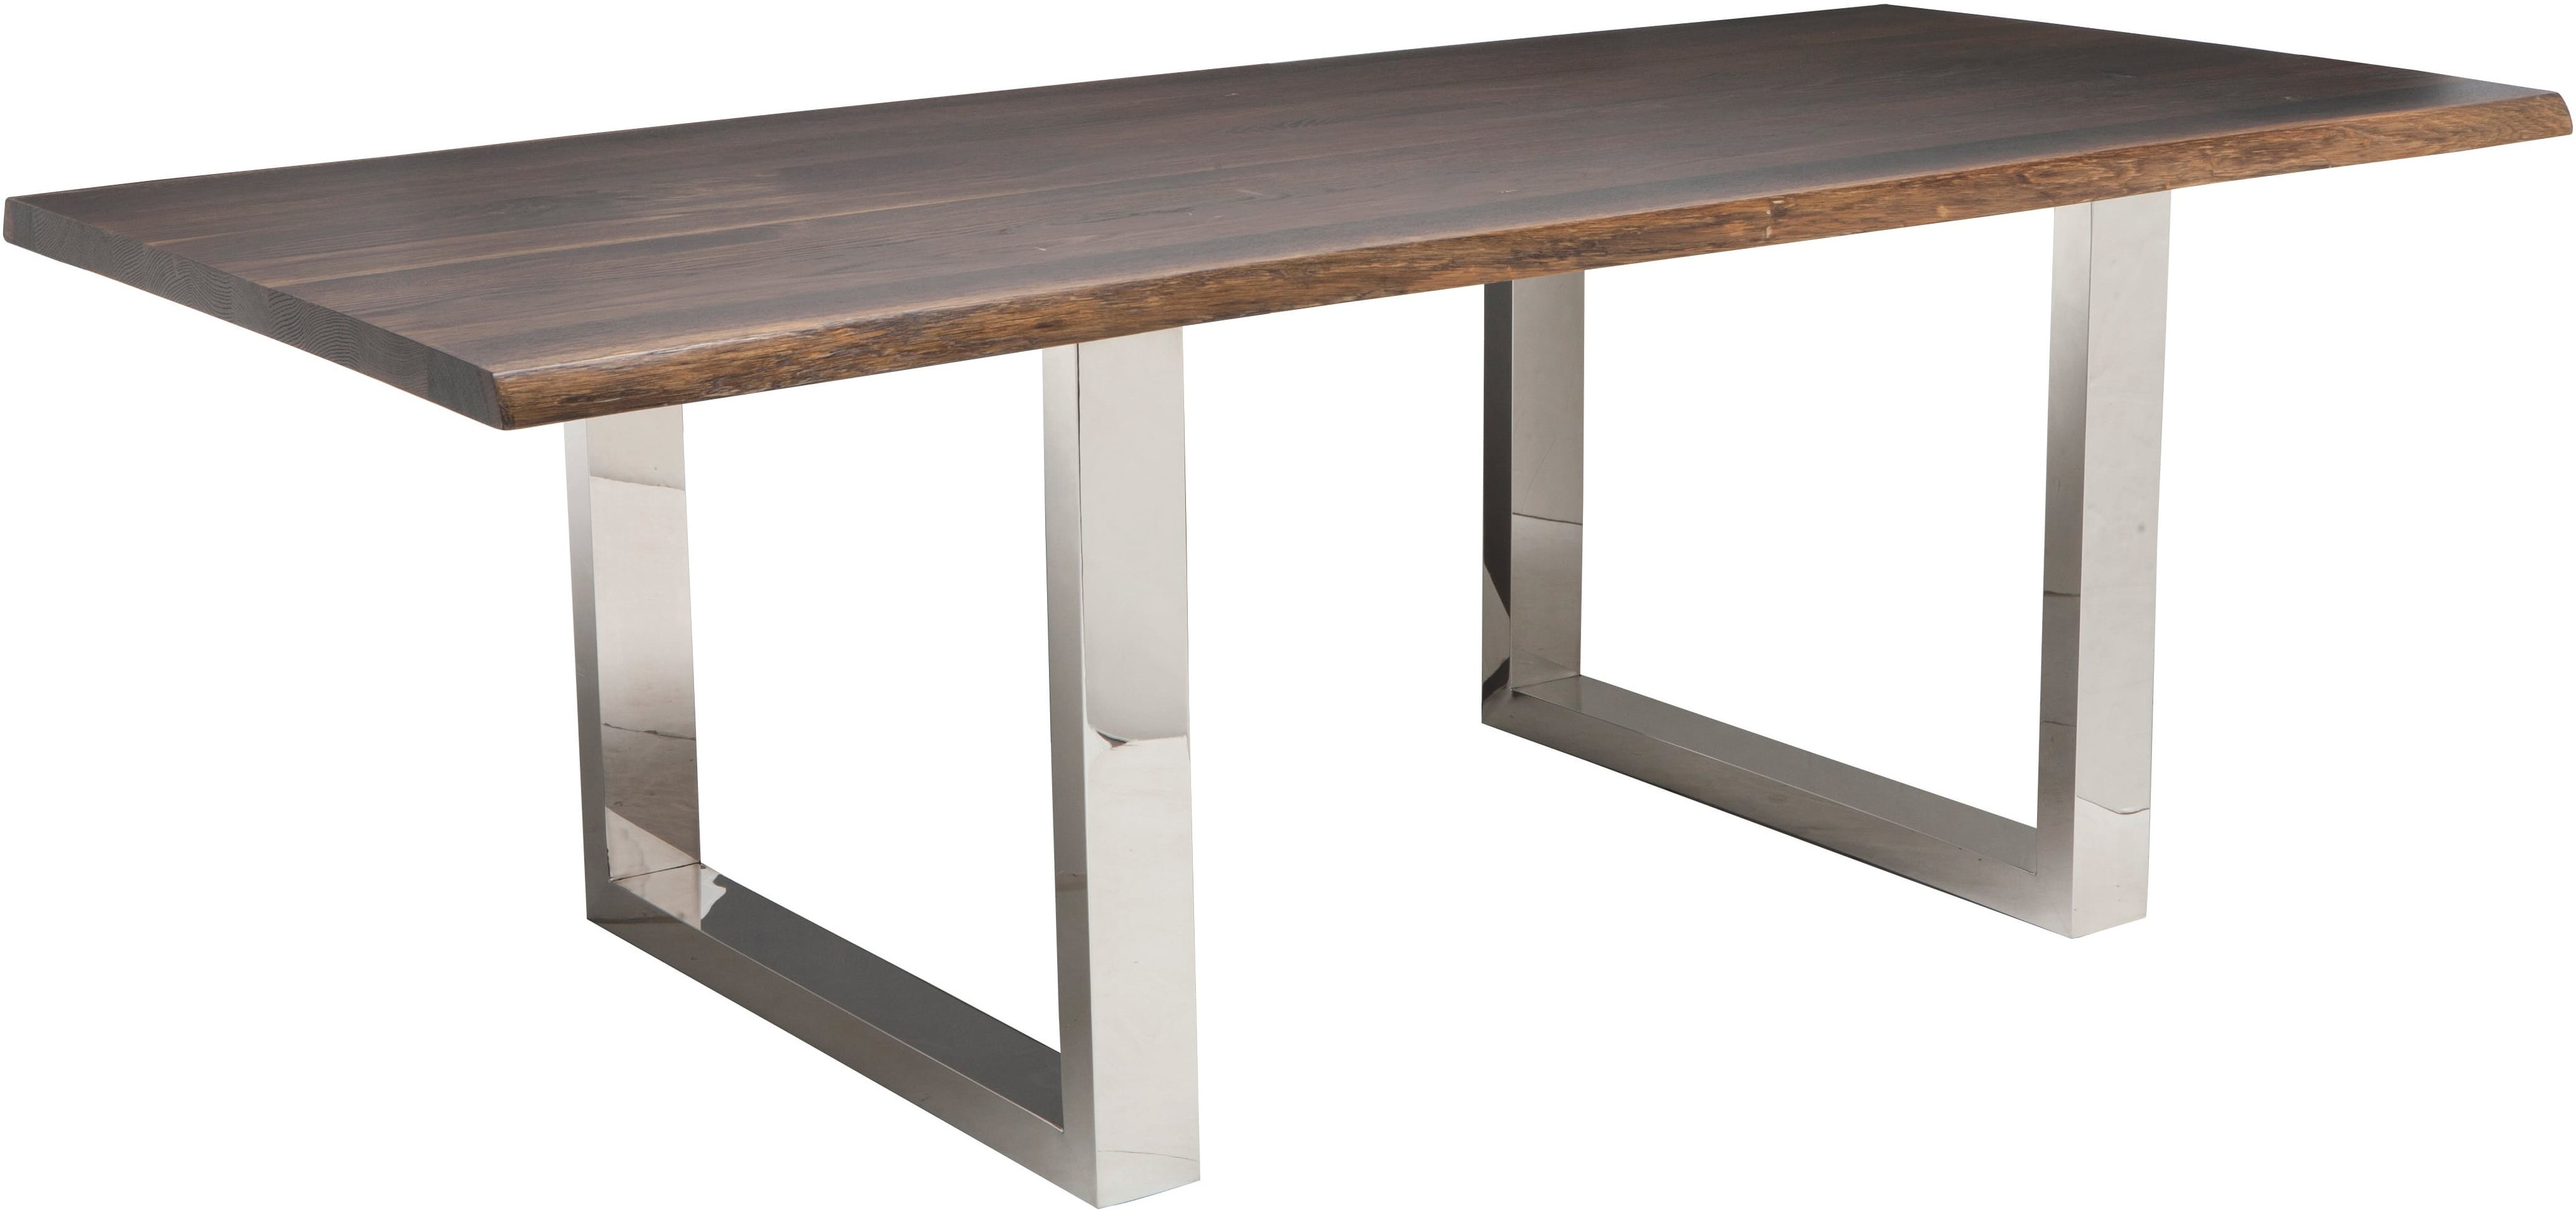 The Lyon Dining Table by Nuevo